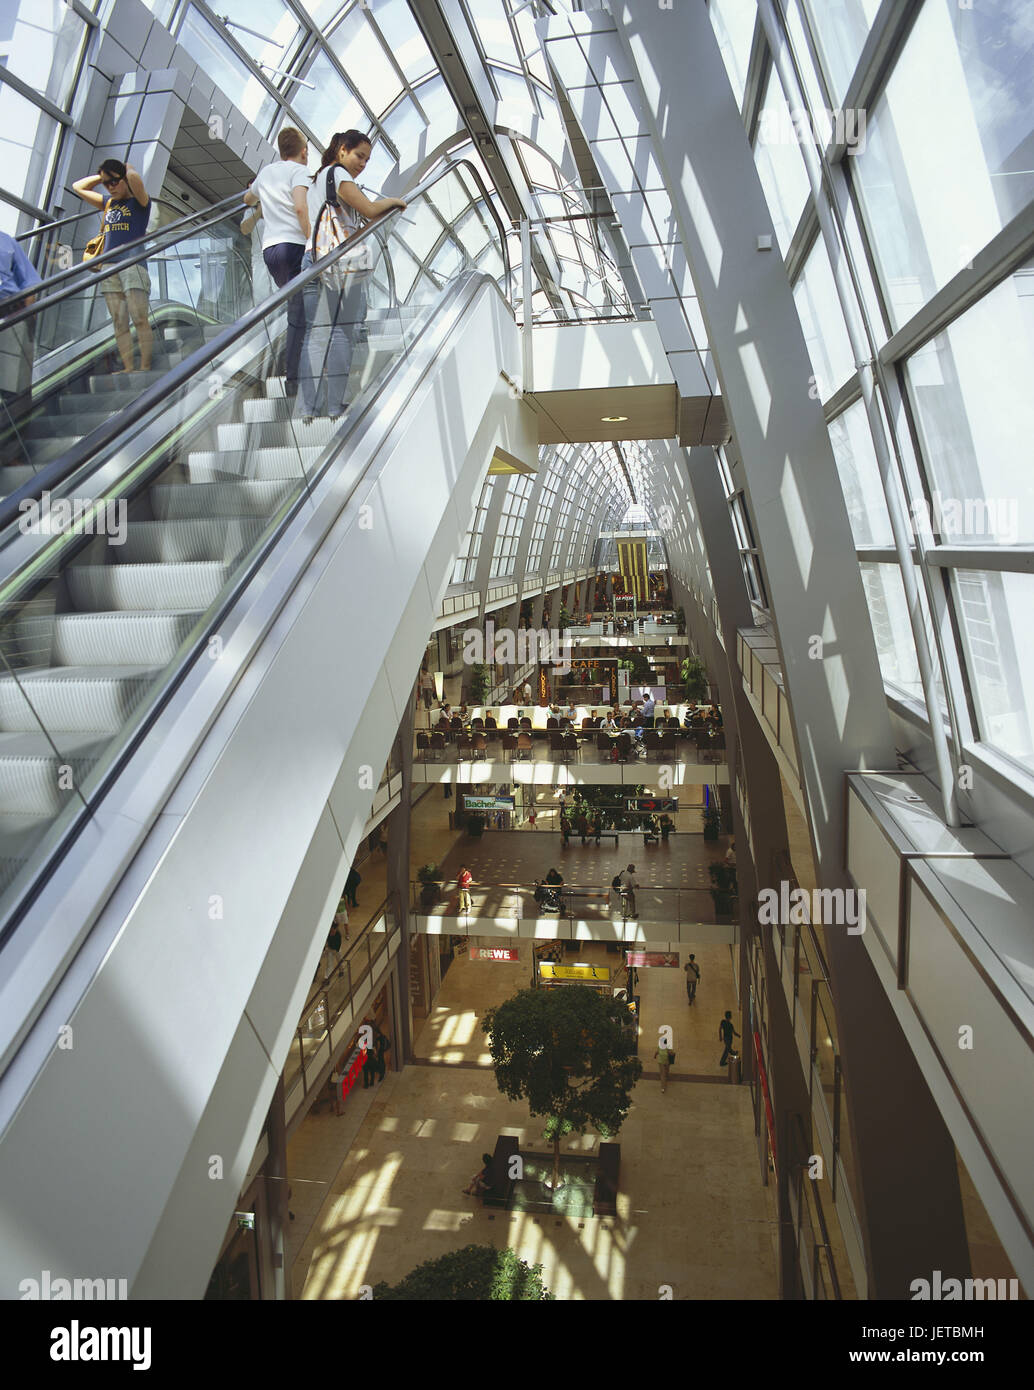 Germany, Baden-Wurttemberg, Karlsruhe, shopping centre 'Ettlinger of goal', interior shot, escalator, customer, town, centre, city centre, purchasing passage, architecture, structure, brightly, flooded with light, glass, dome, glass dome, floors, modern, shops, people, Stock Photo